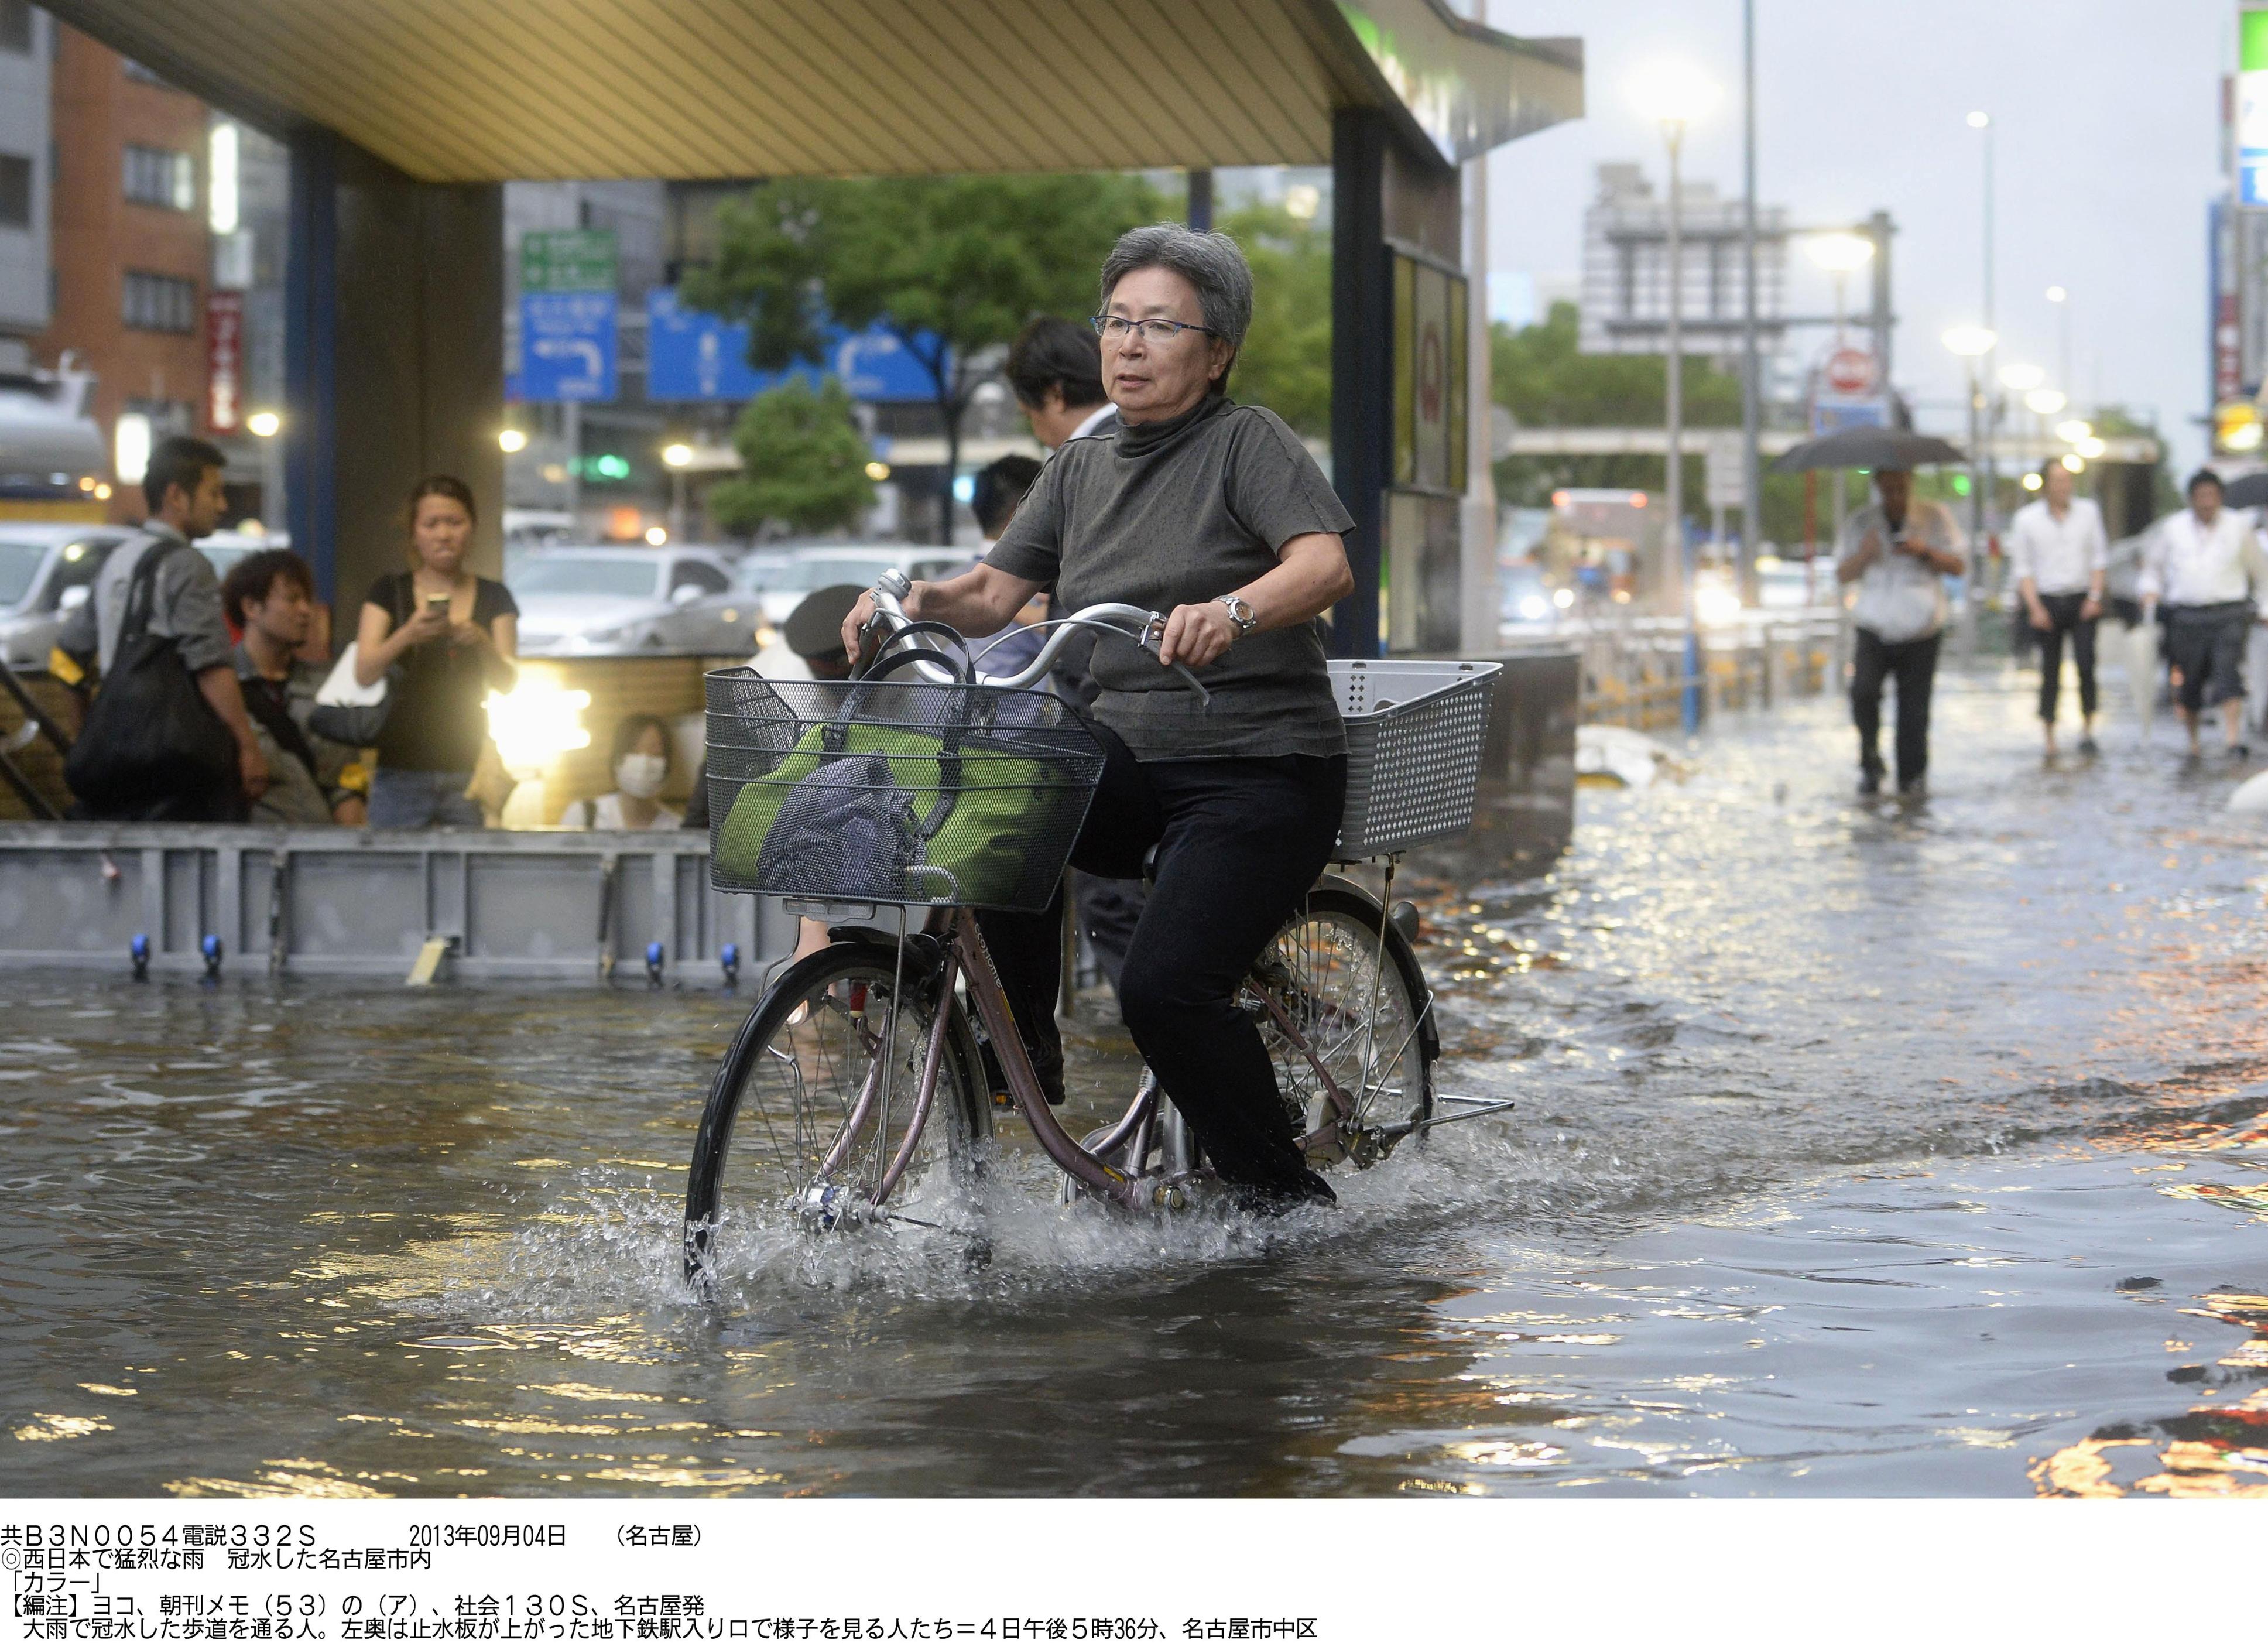 High and wet: A woman bicycles down a flooded street in Naka Ward, Nagoya, around 5:30 p.m. Wednesday as people look on from inside a subway station's flood barrier. | KYODO